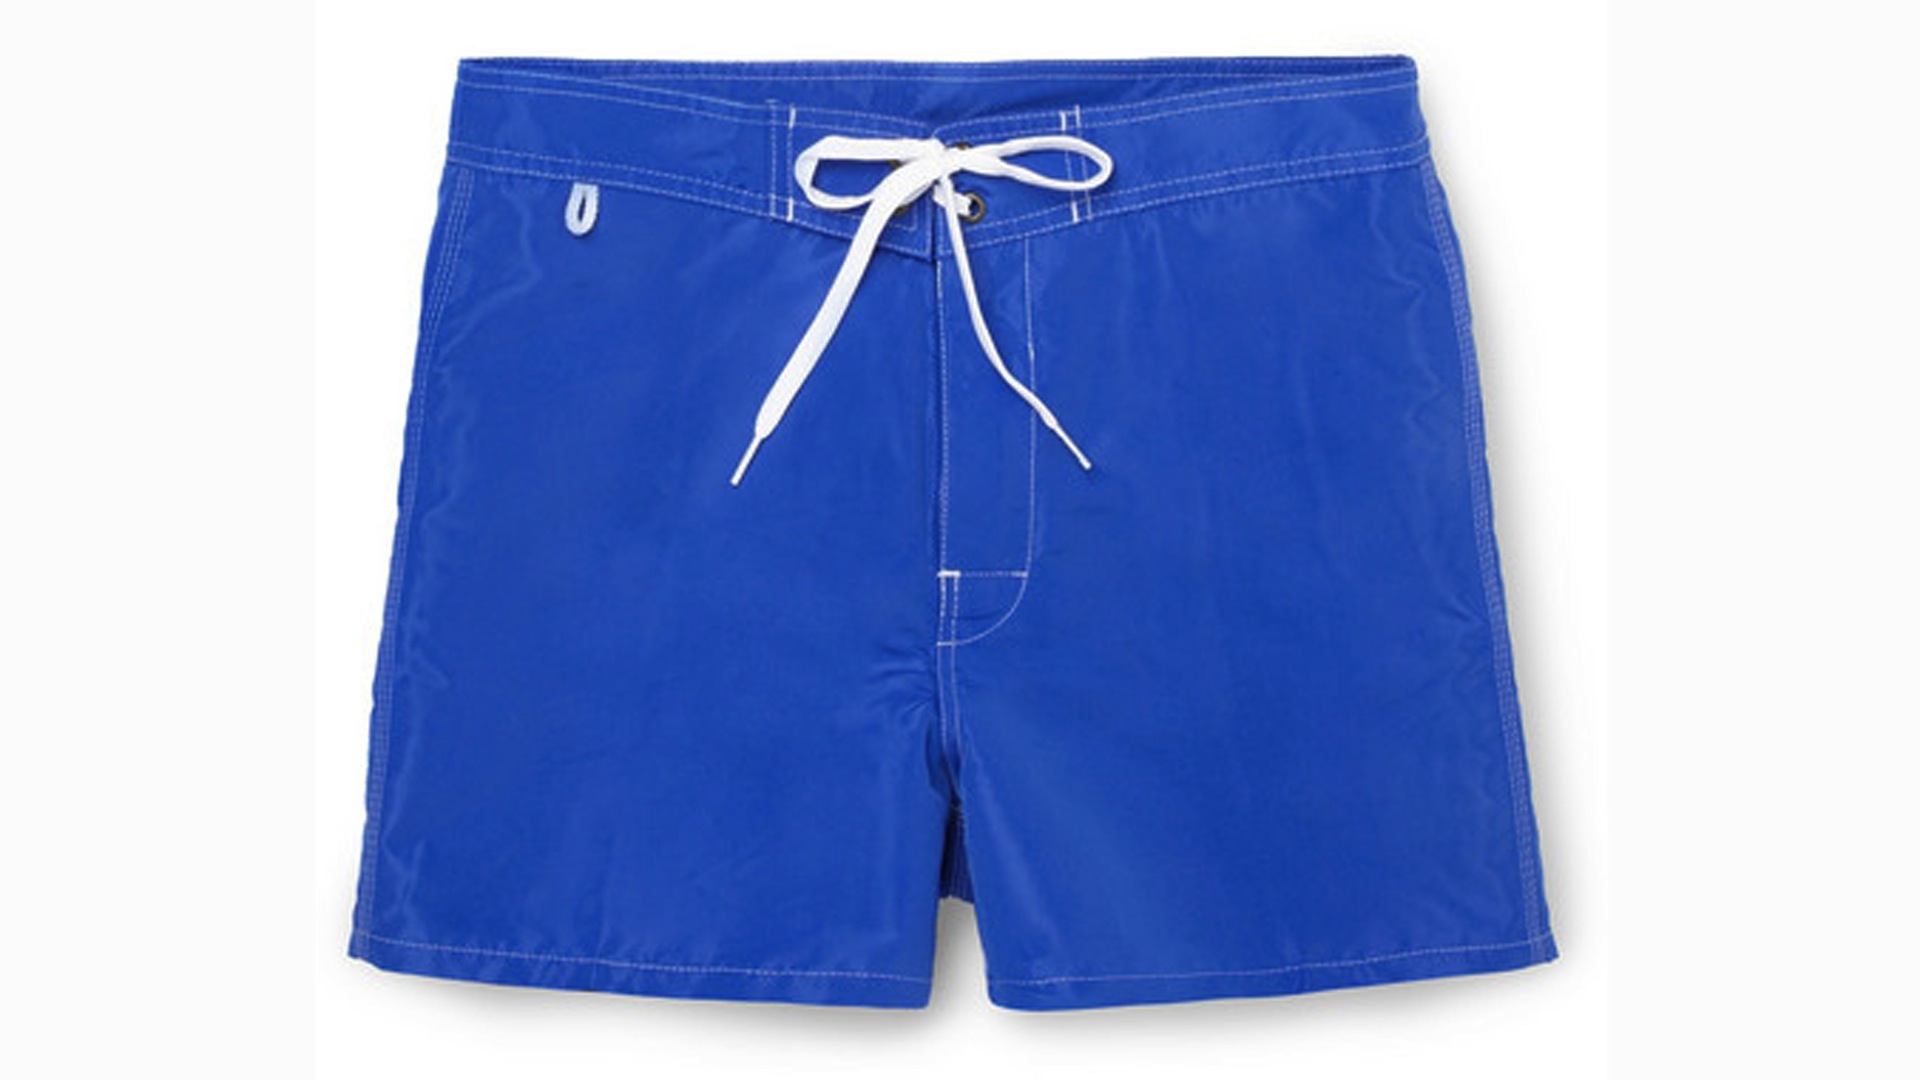 HIGH QUALITY UNISEX SOLID COLOR SWIM SHORTS